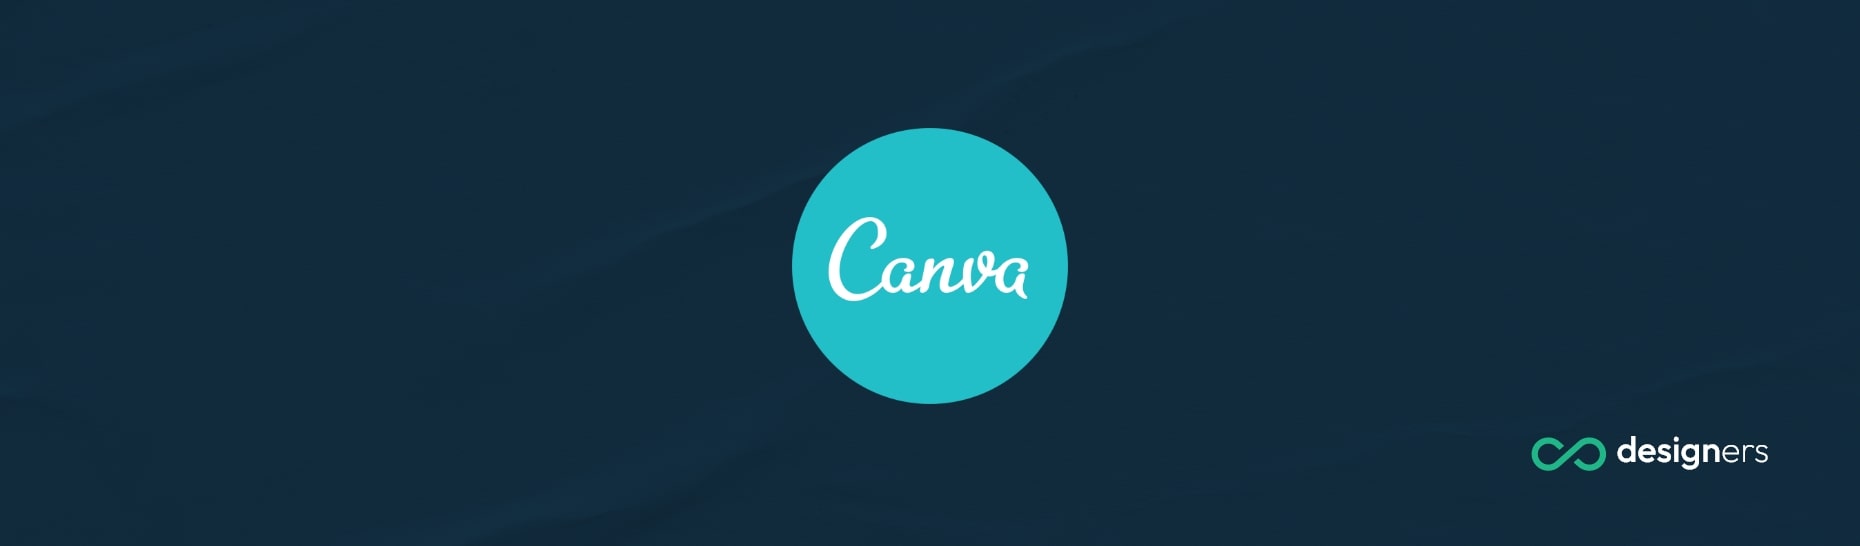 How Do I Get 300 DPI in Canva?